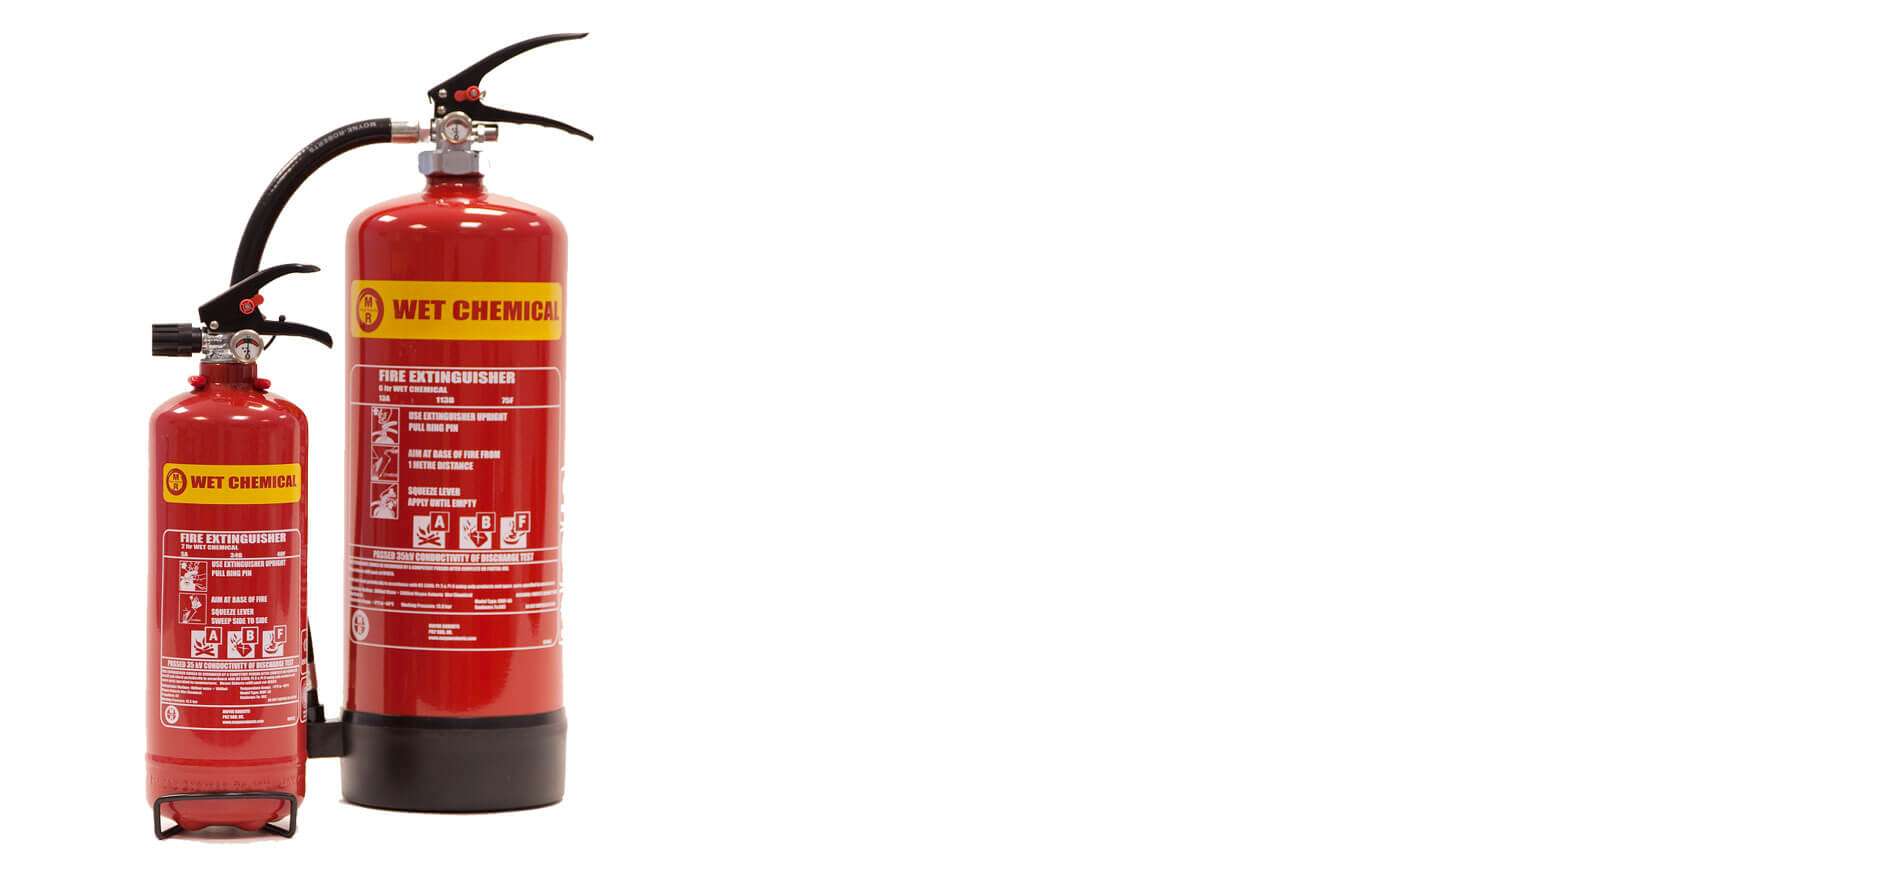 Wet Chemical Fire Extinguishers: A New Innovation